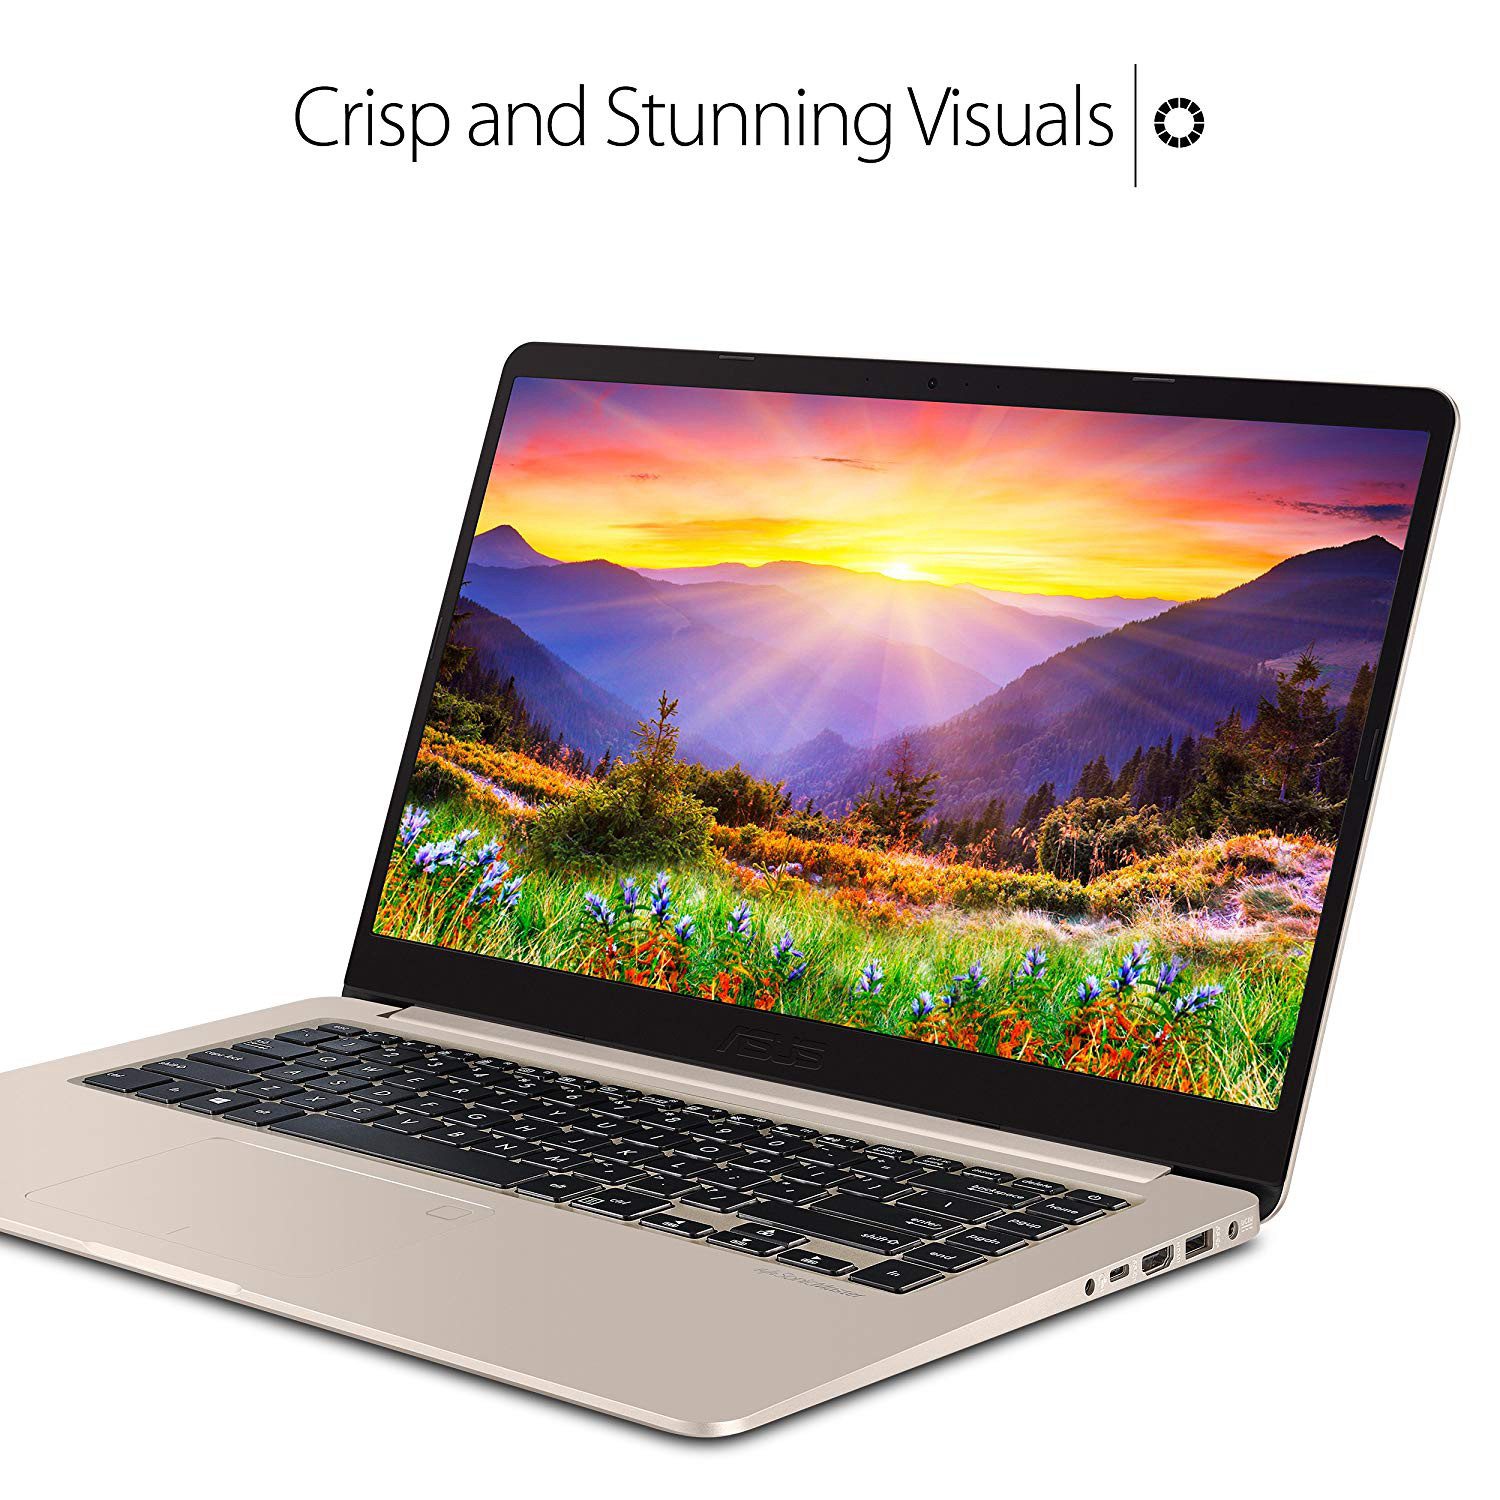 ASUS VivoBook S Ultra Thin and Portable Laptop, Intel Core i7-8550U Processor, 8GB DDR4 RAM, 128GB SSD+1TB HDD, 15.6” FHD WideView Display, ASUS NanoEdge Bezel, S510UA-DS71